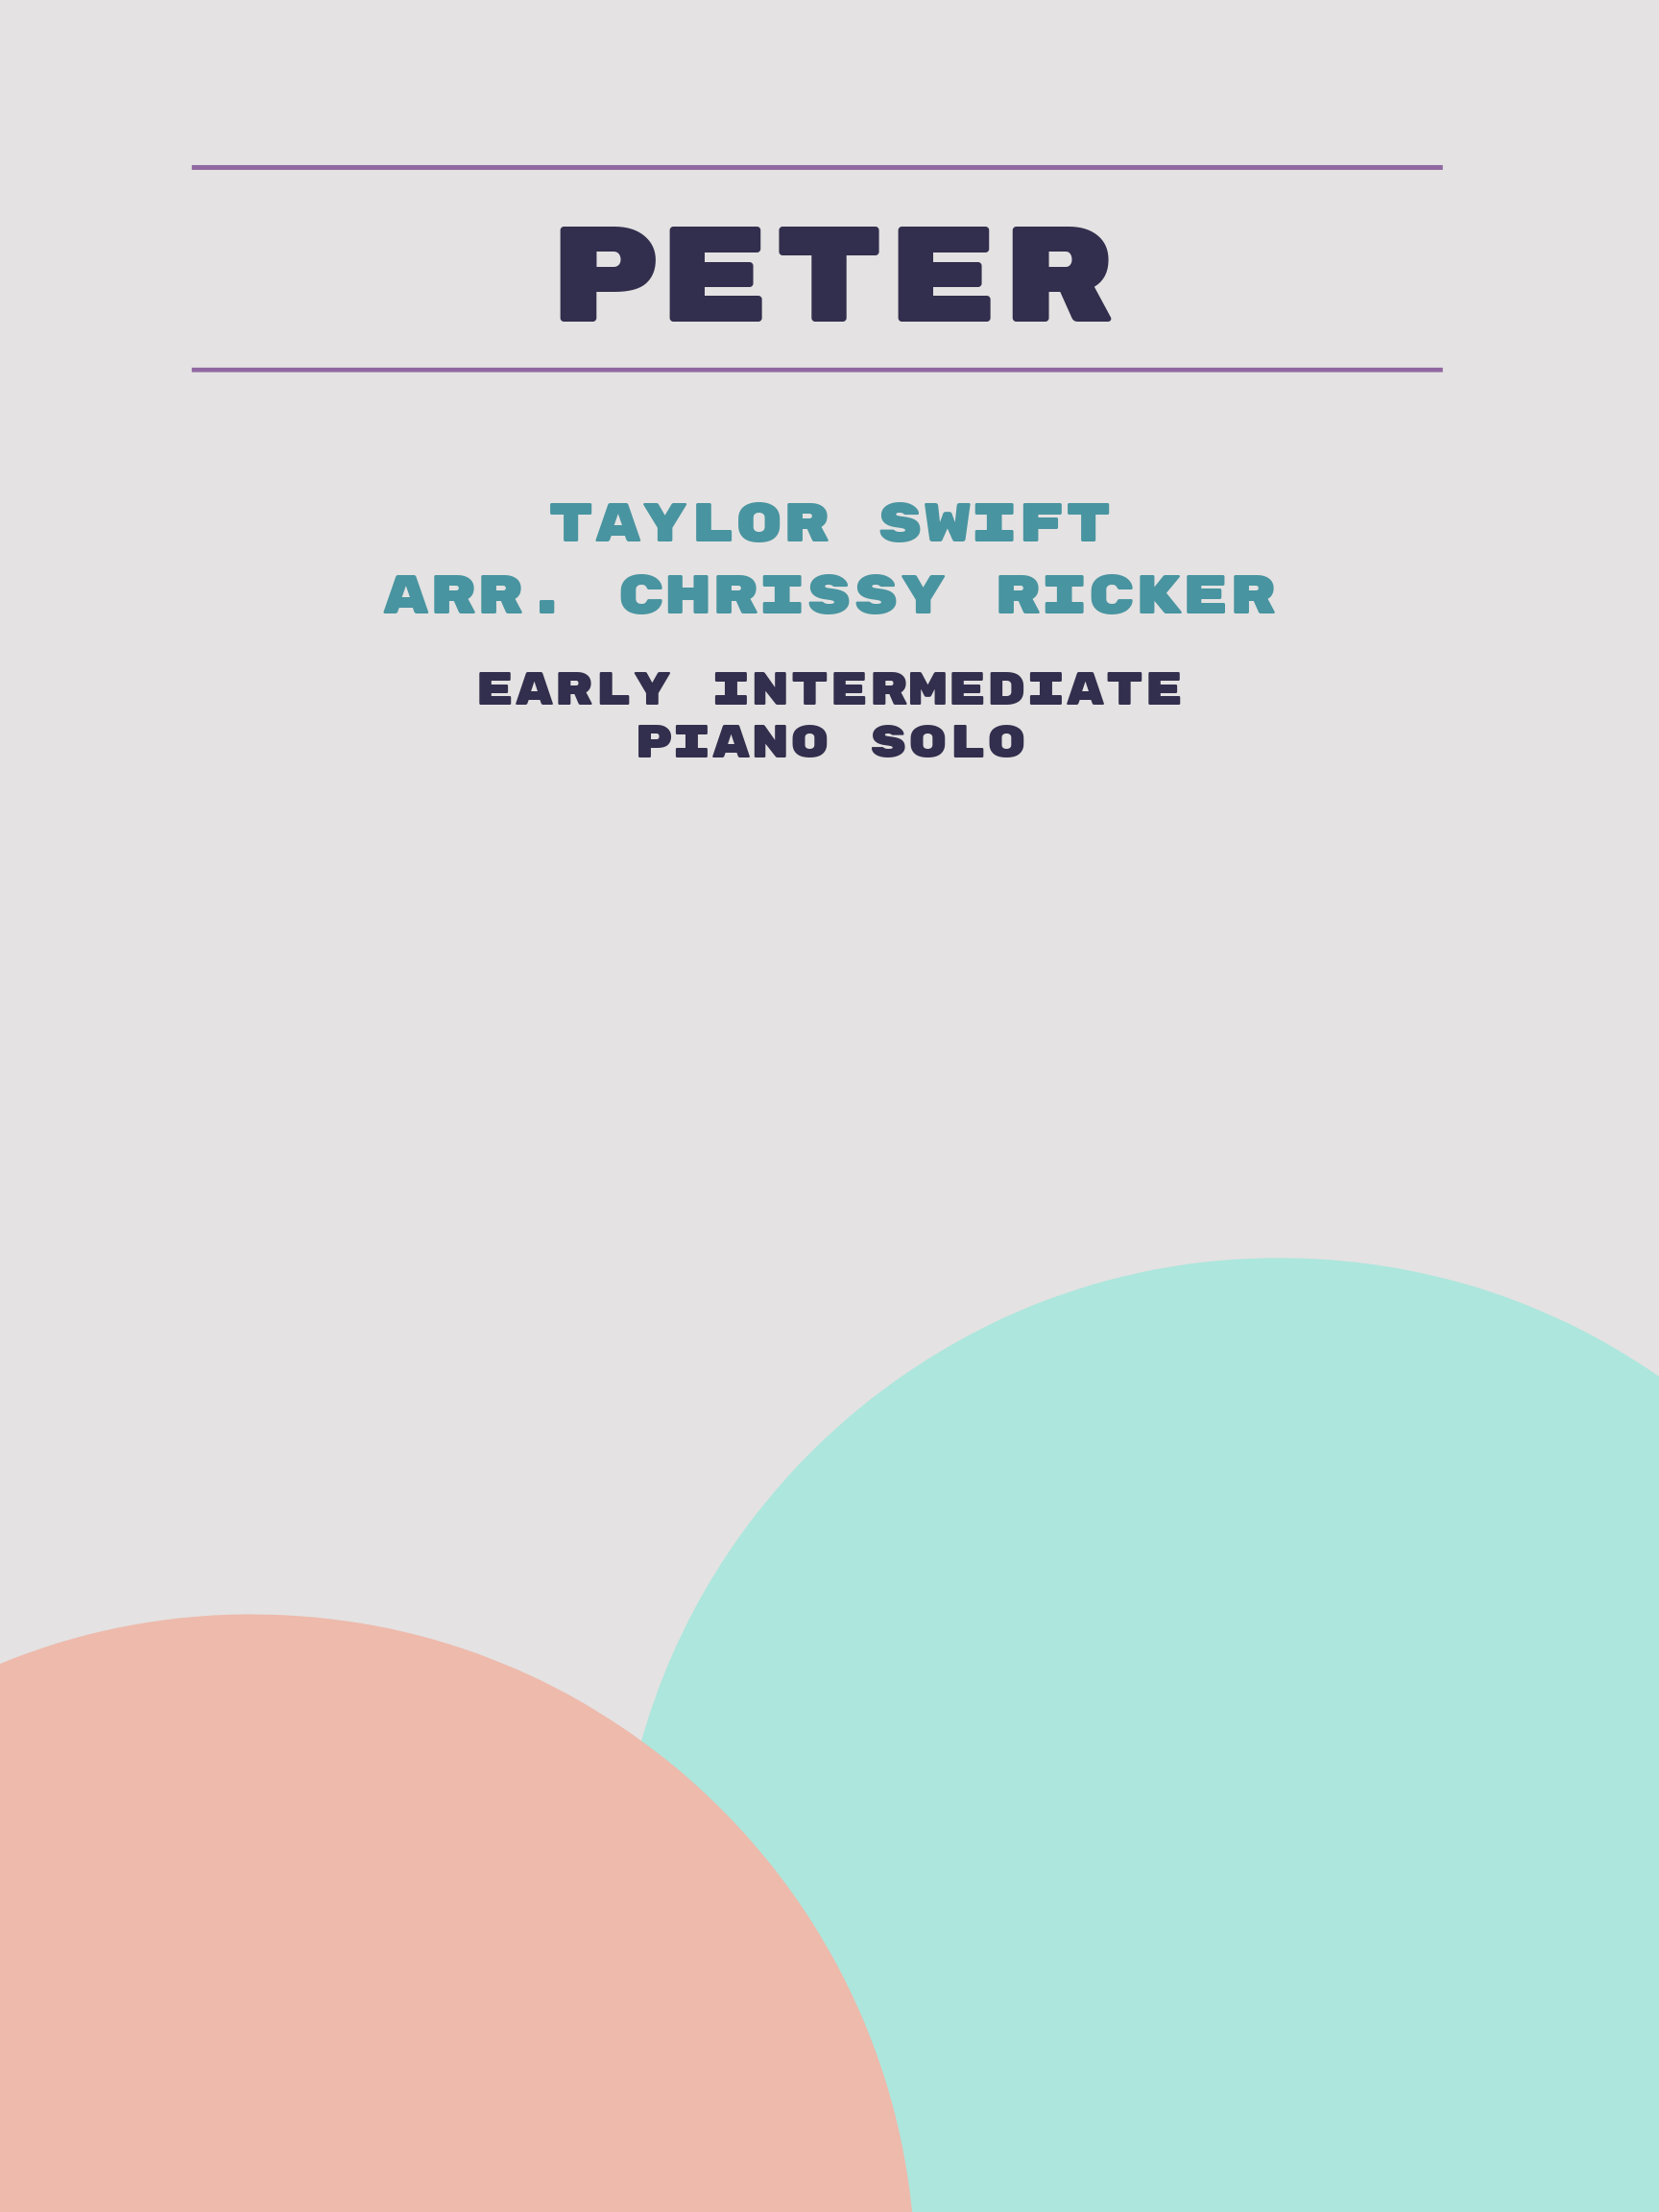 Peter by Taylor Swift